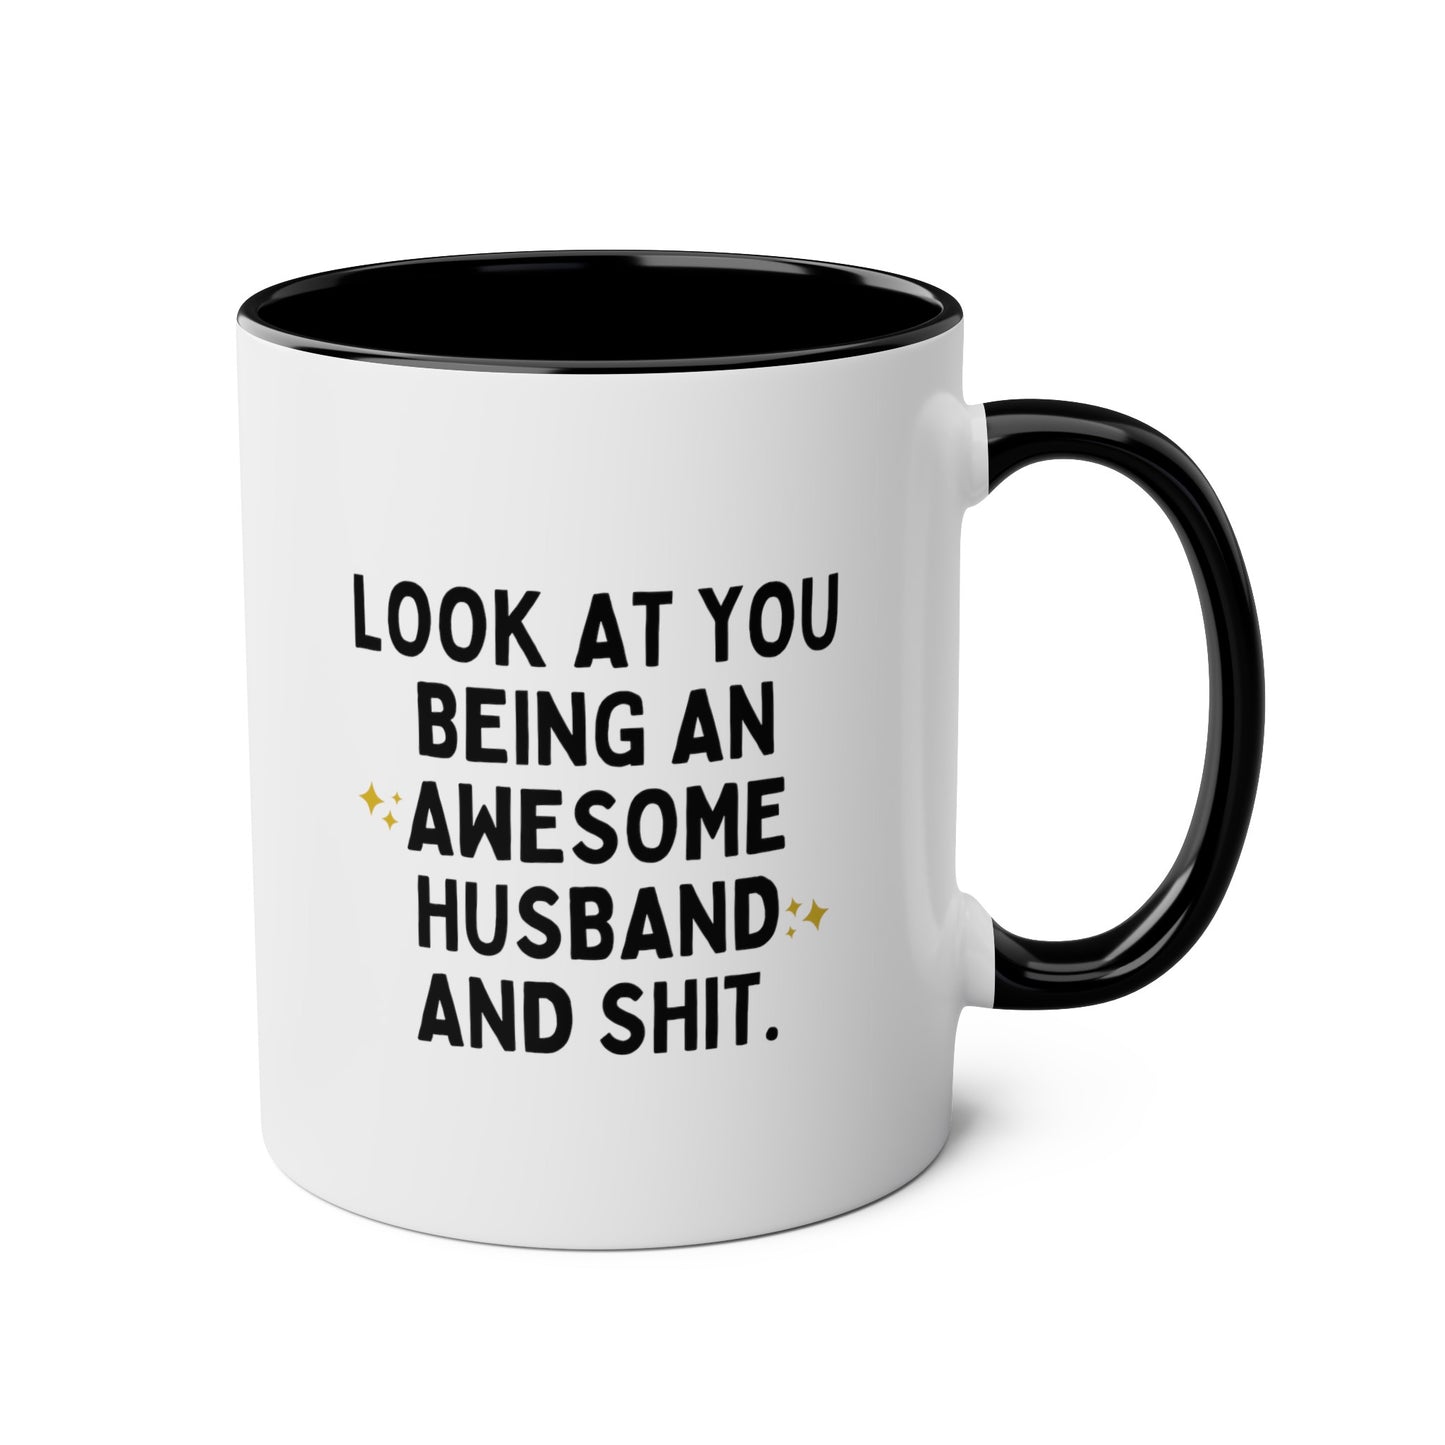 Look At You Being An Awesome Husband And Shit 11oz white with black accent funny large coffee mug gift for hubby curse joke gag idea waveywares wavey wares wavywares wavy wares